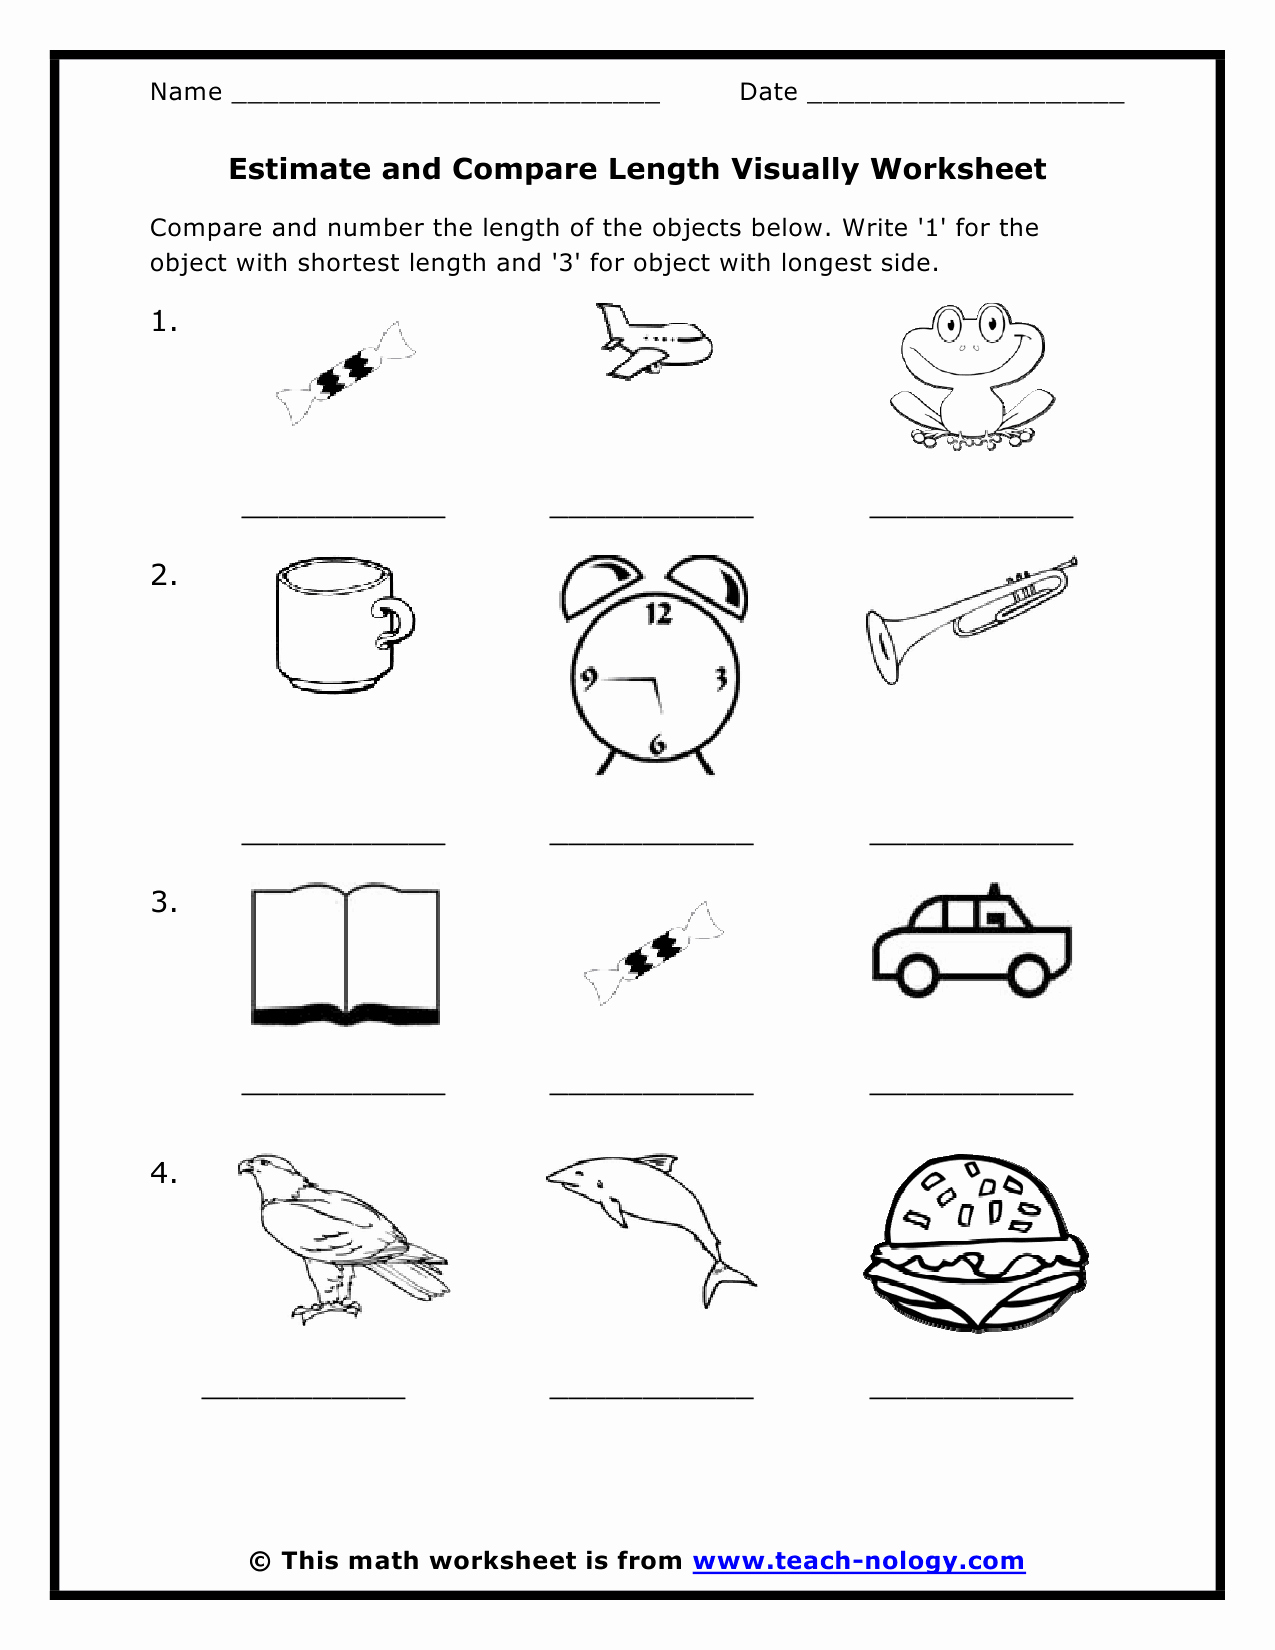 Measurement Estimation Worksheets Lovely Estimate and Pare Length Visually